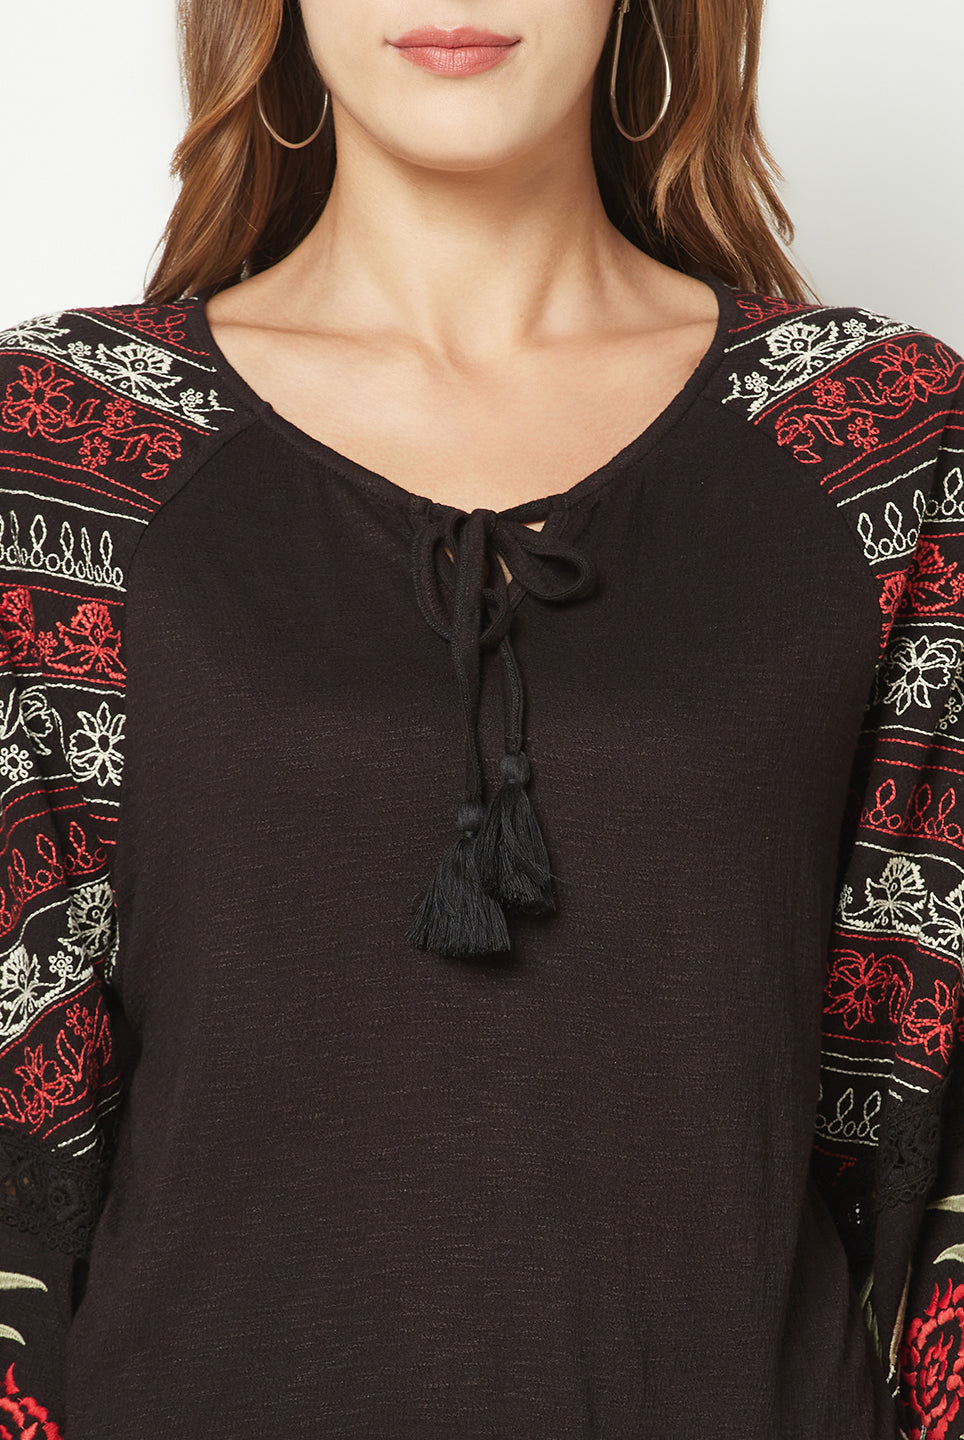 Embroidered Black Top